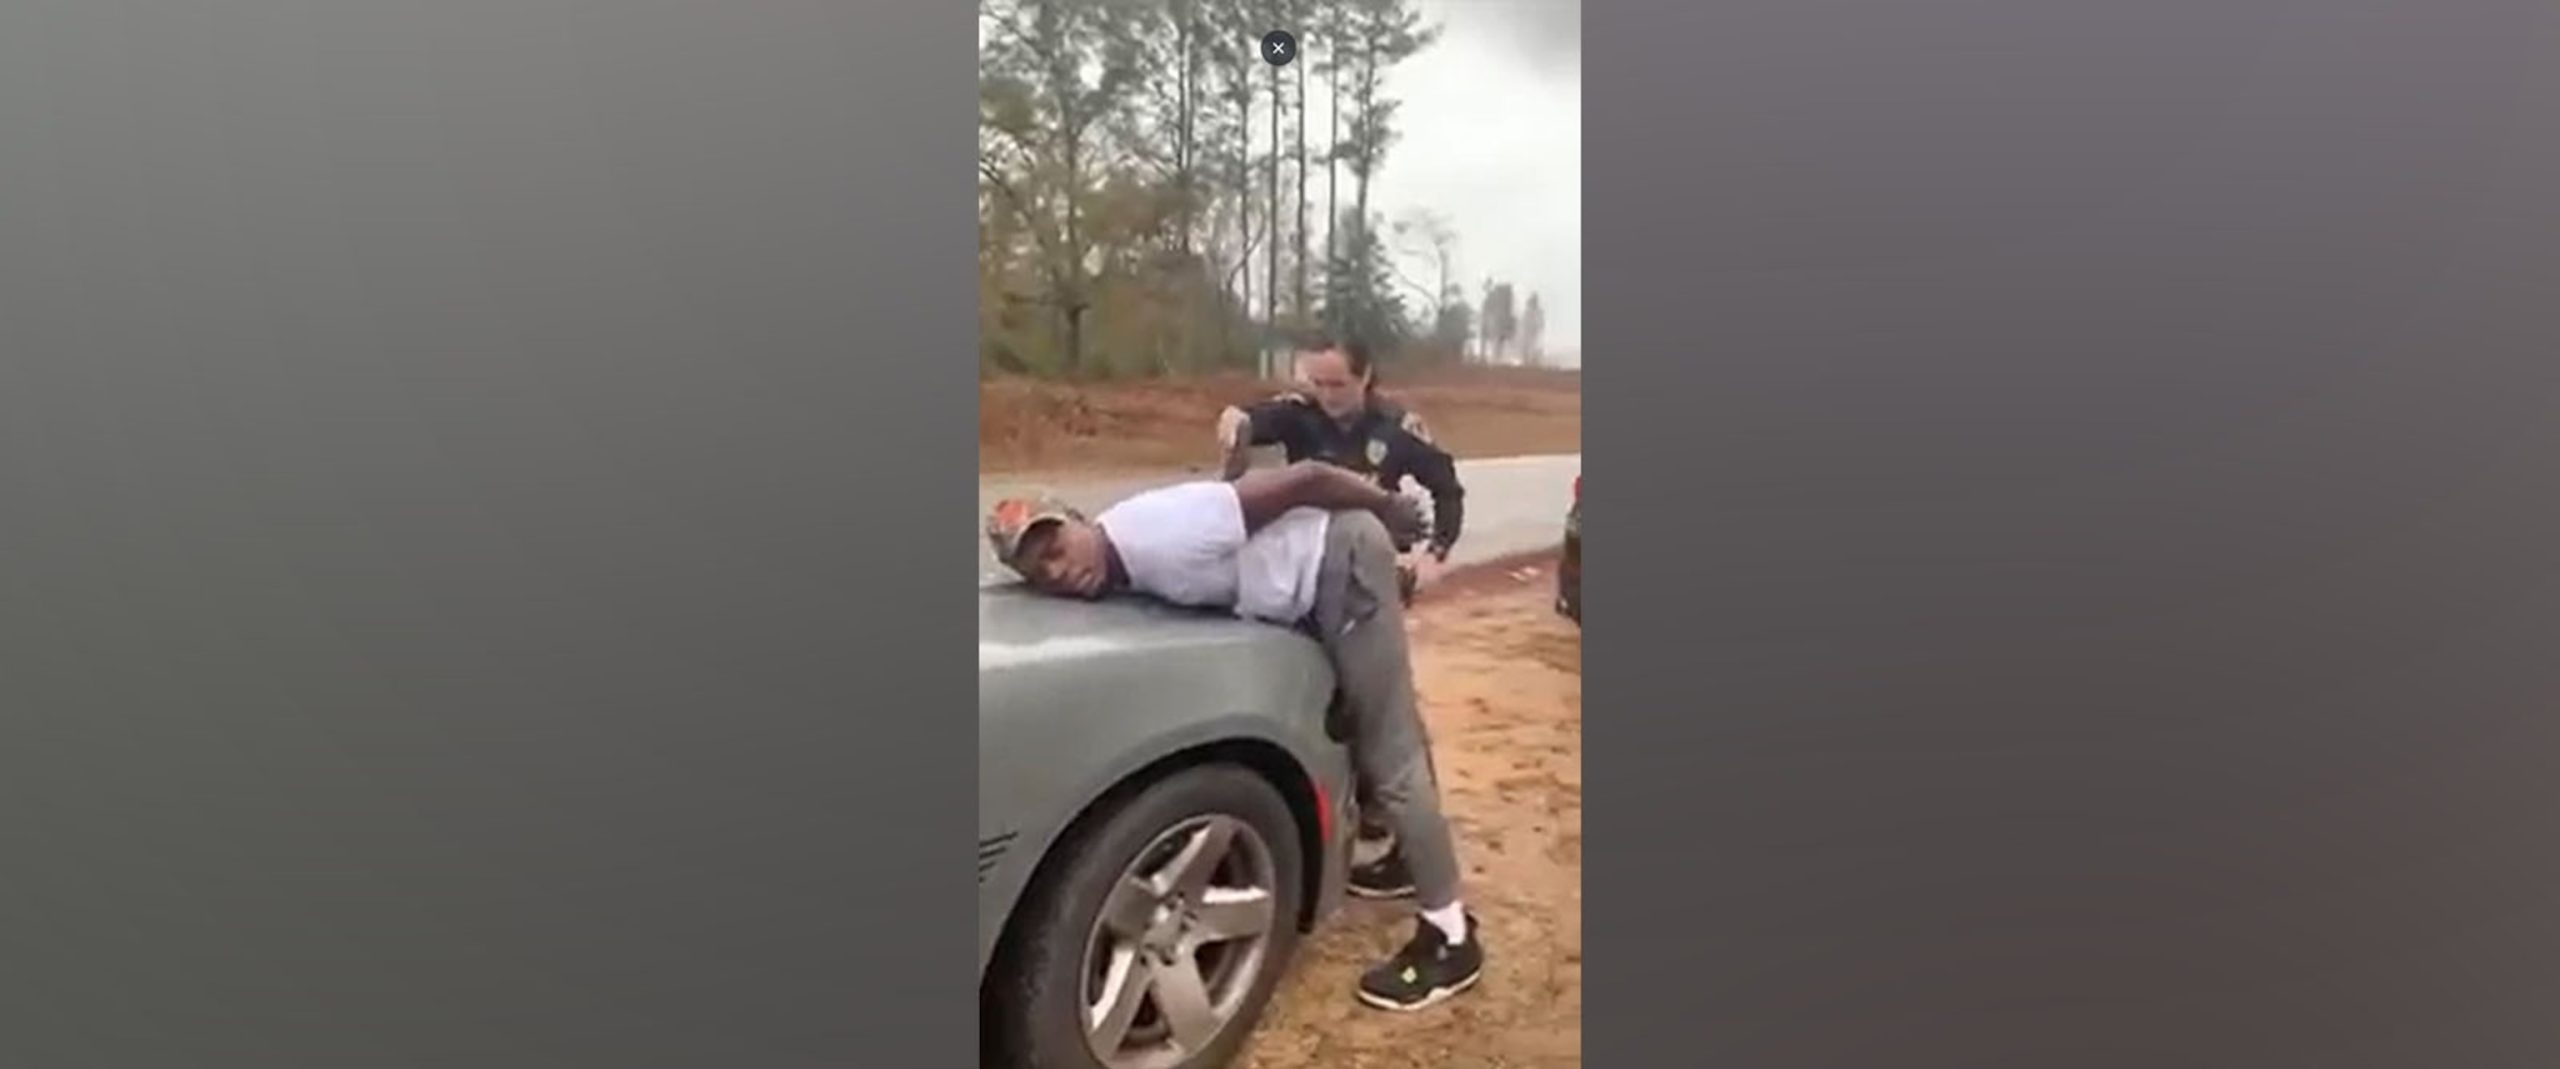 Alabama Police Officer's Arrest of Man Goes Viral, Prompting Traumatized Individual to Share Experience